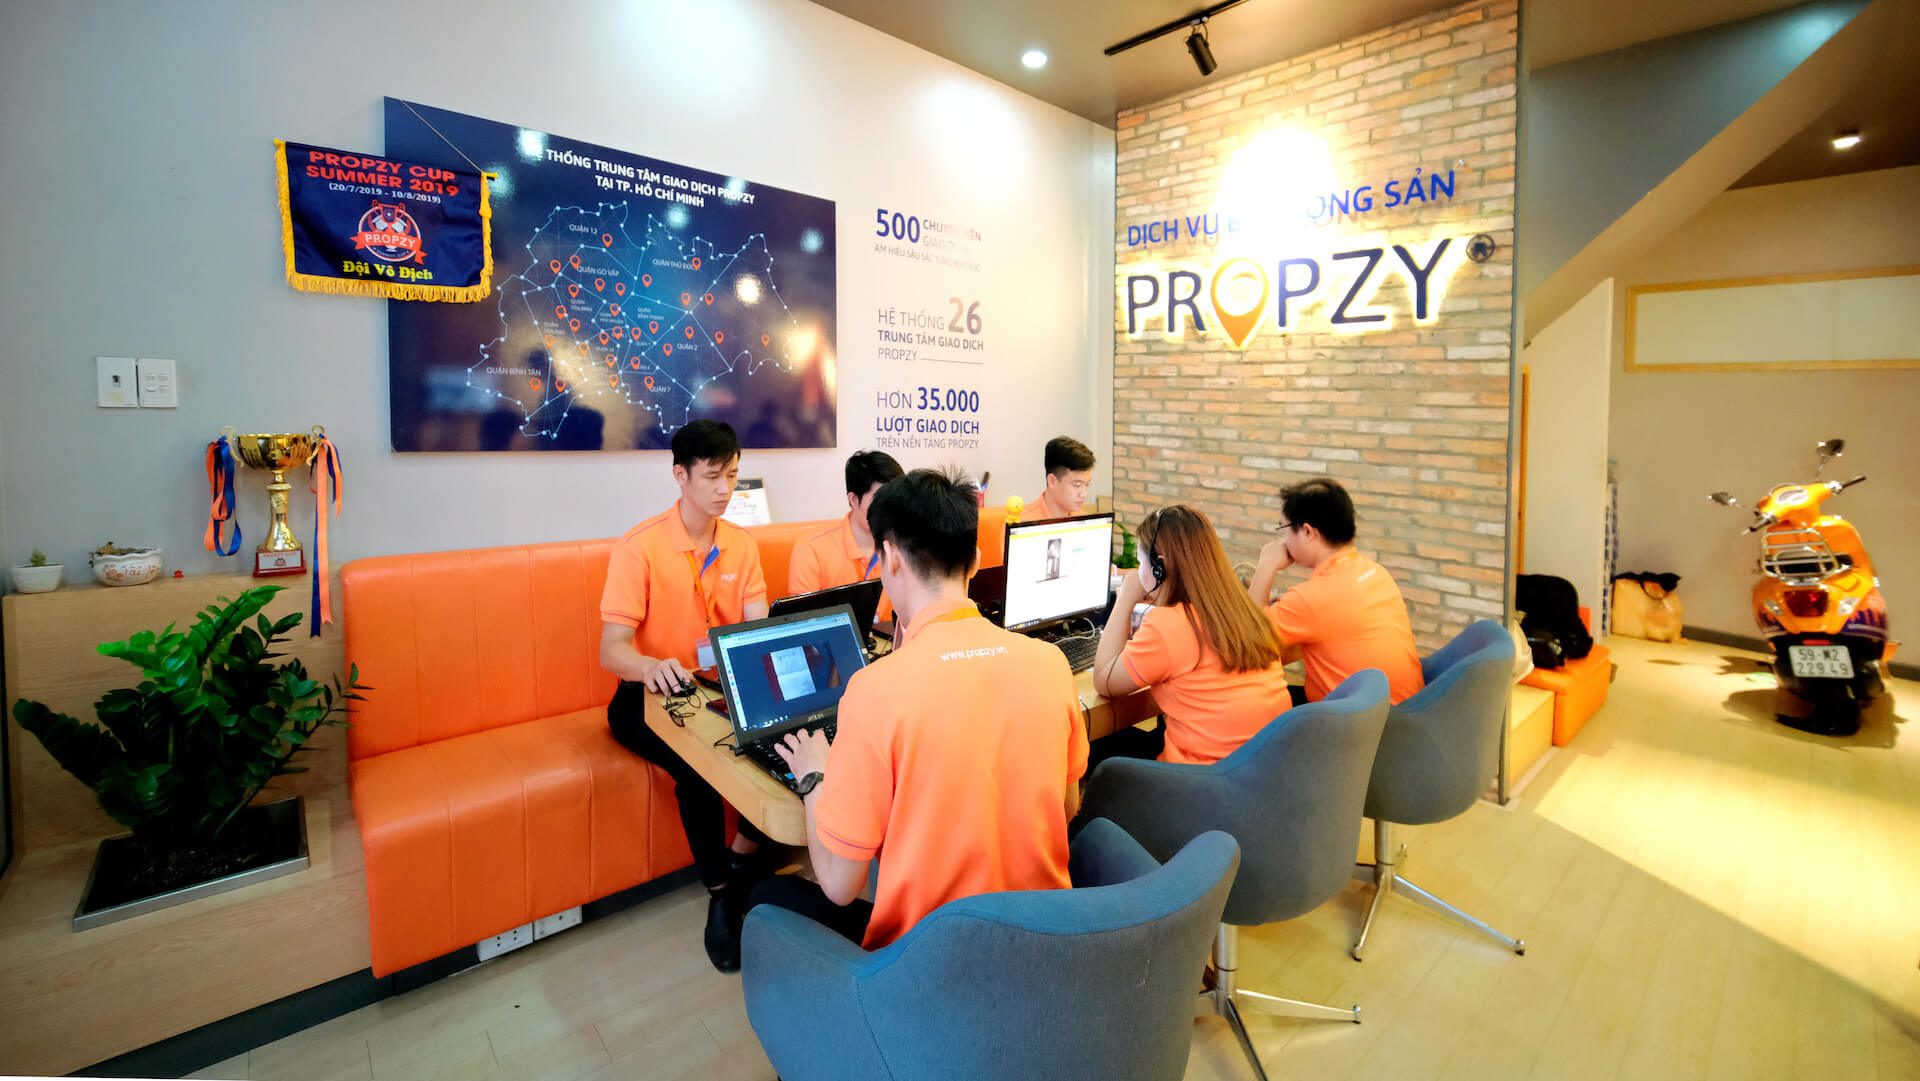 Vietnam's proptech startup Propzy shuts down operations